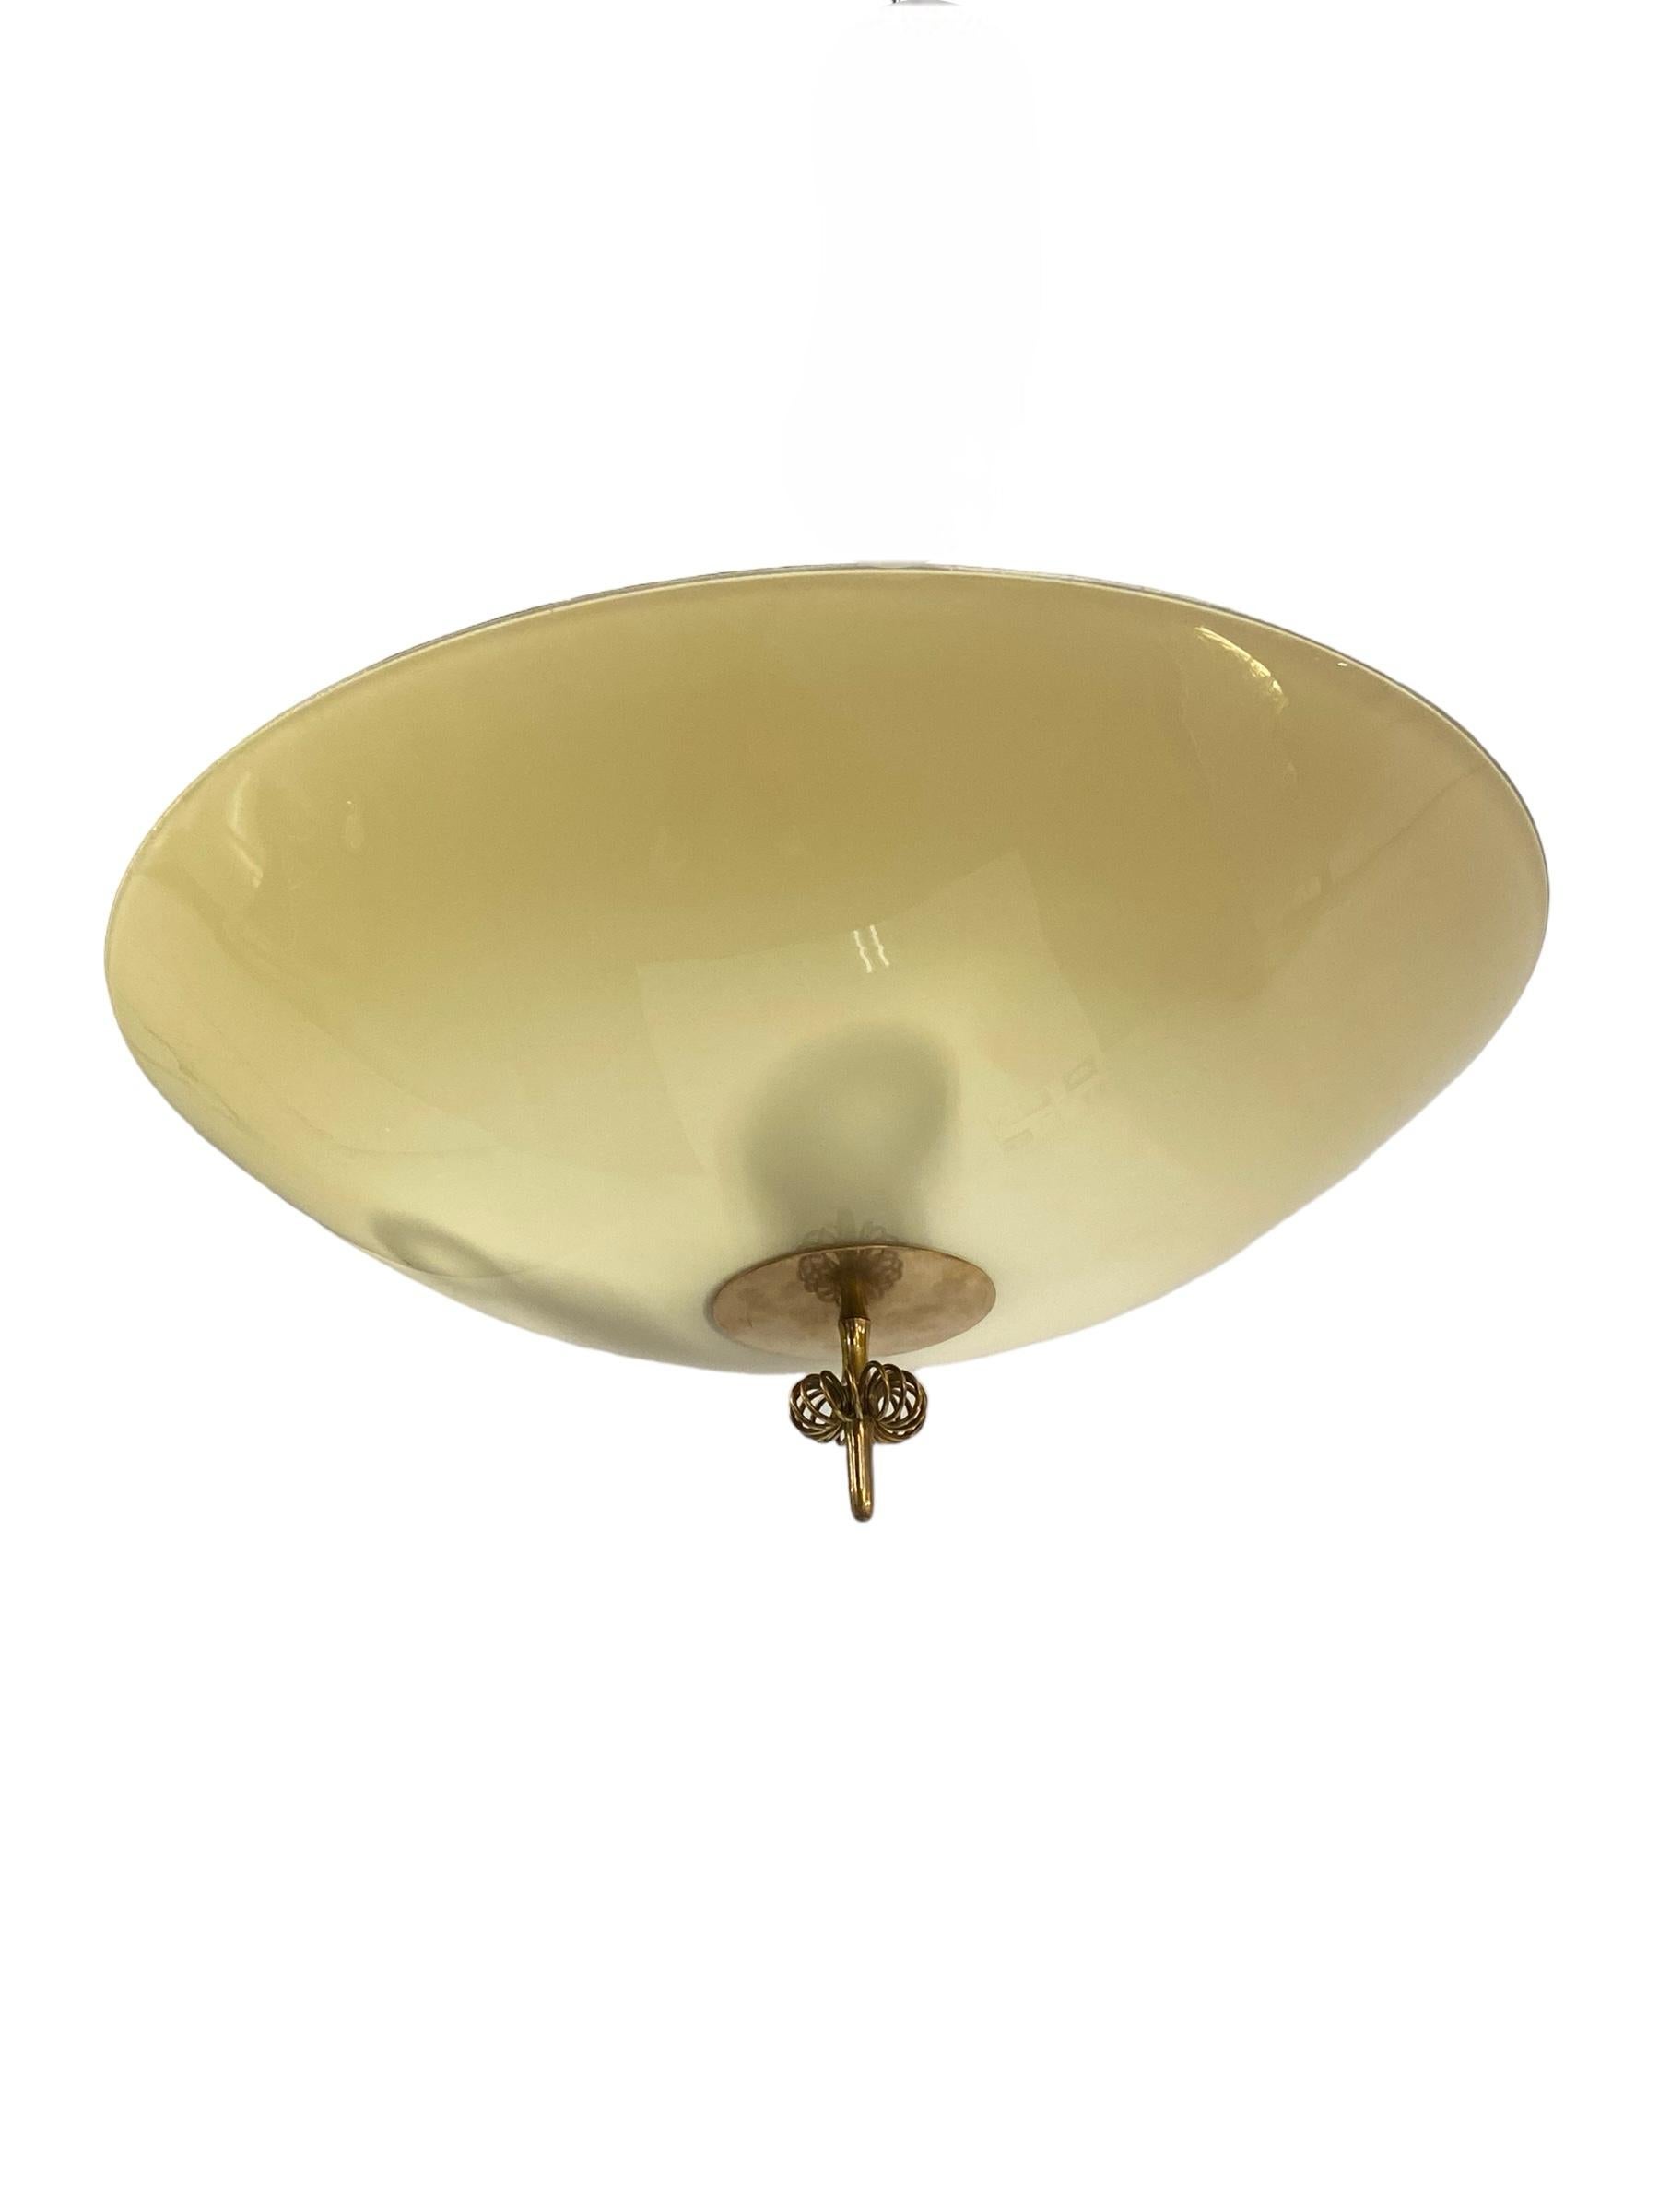 Finnish Paavo Tynell Ceiling Lamp/Flush Mount  Model Number 1088 For Idman, 1950s For Sale